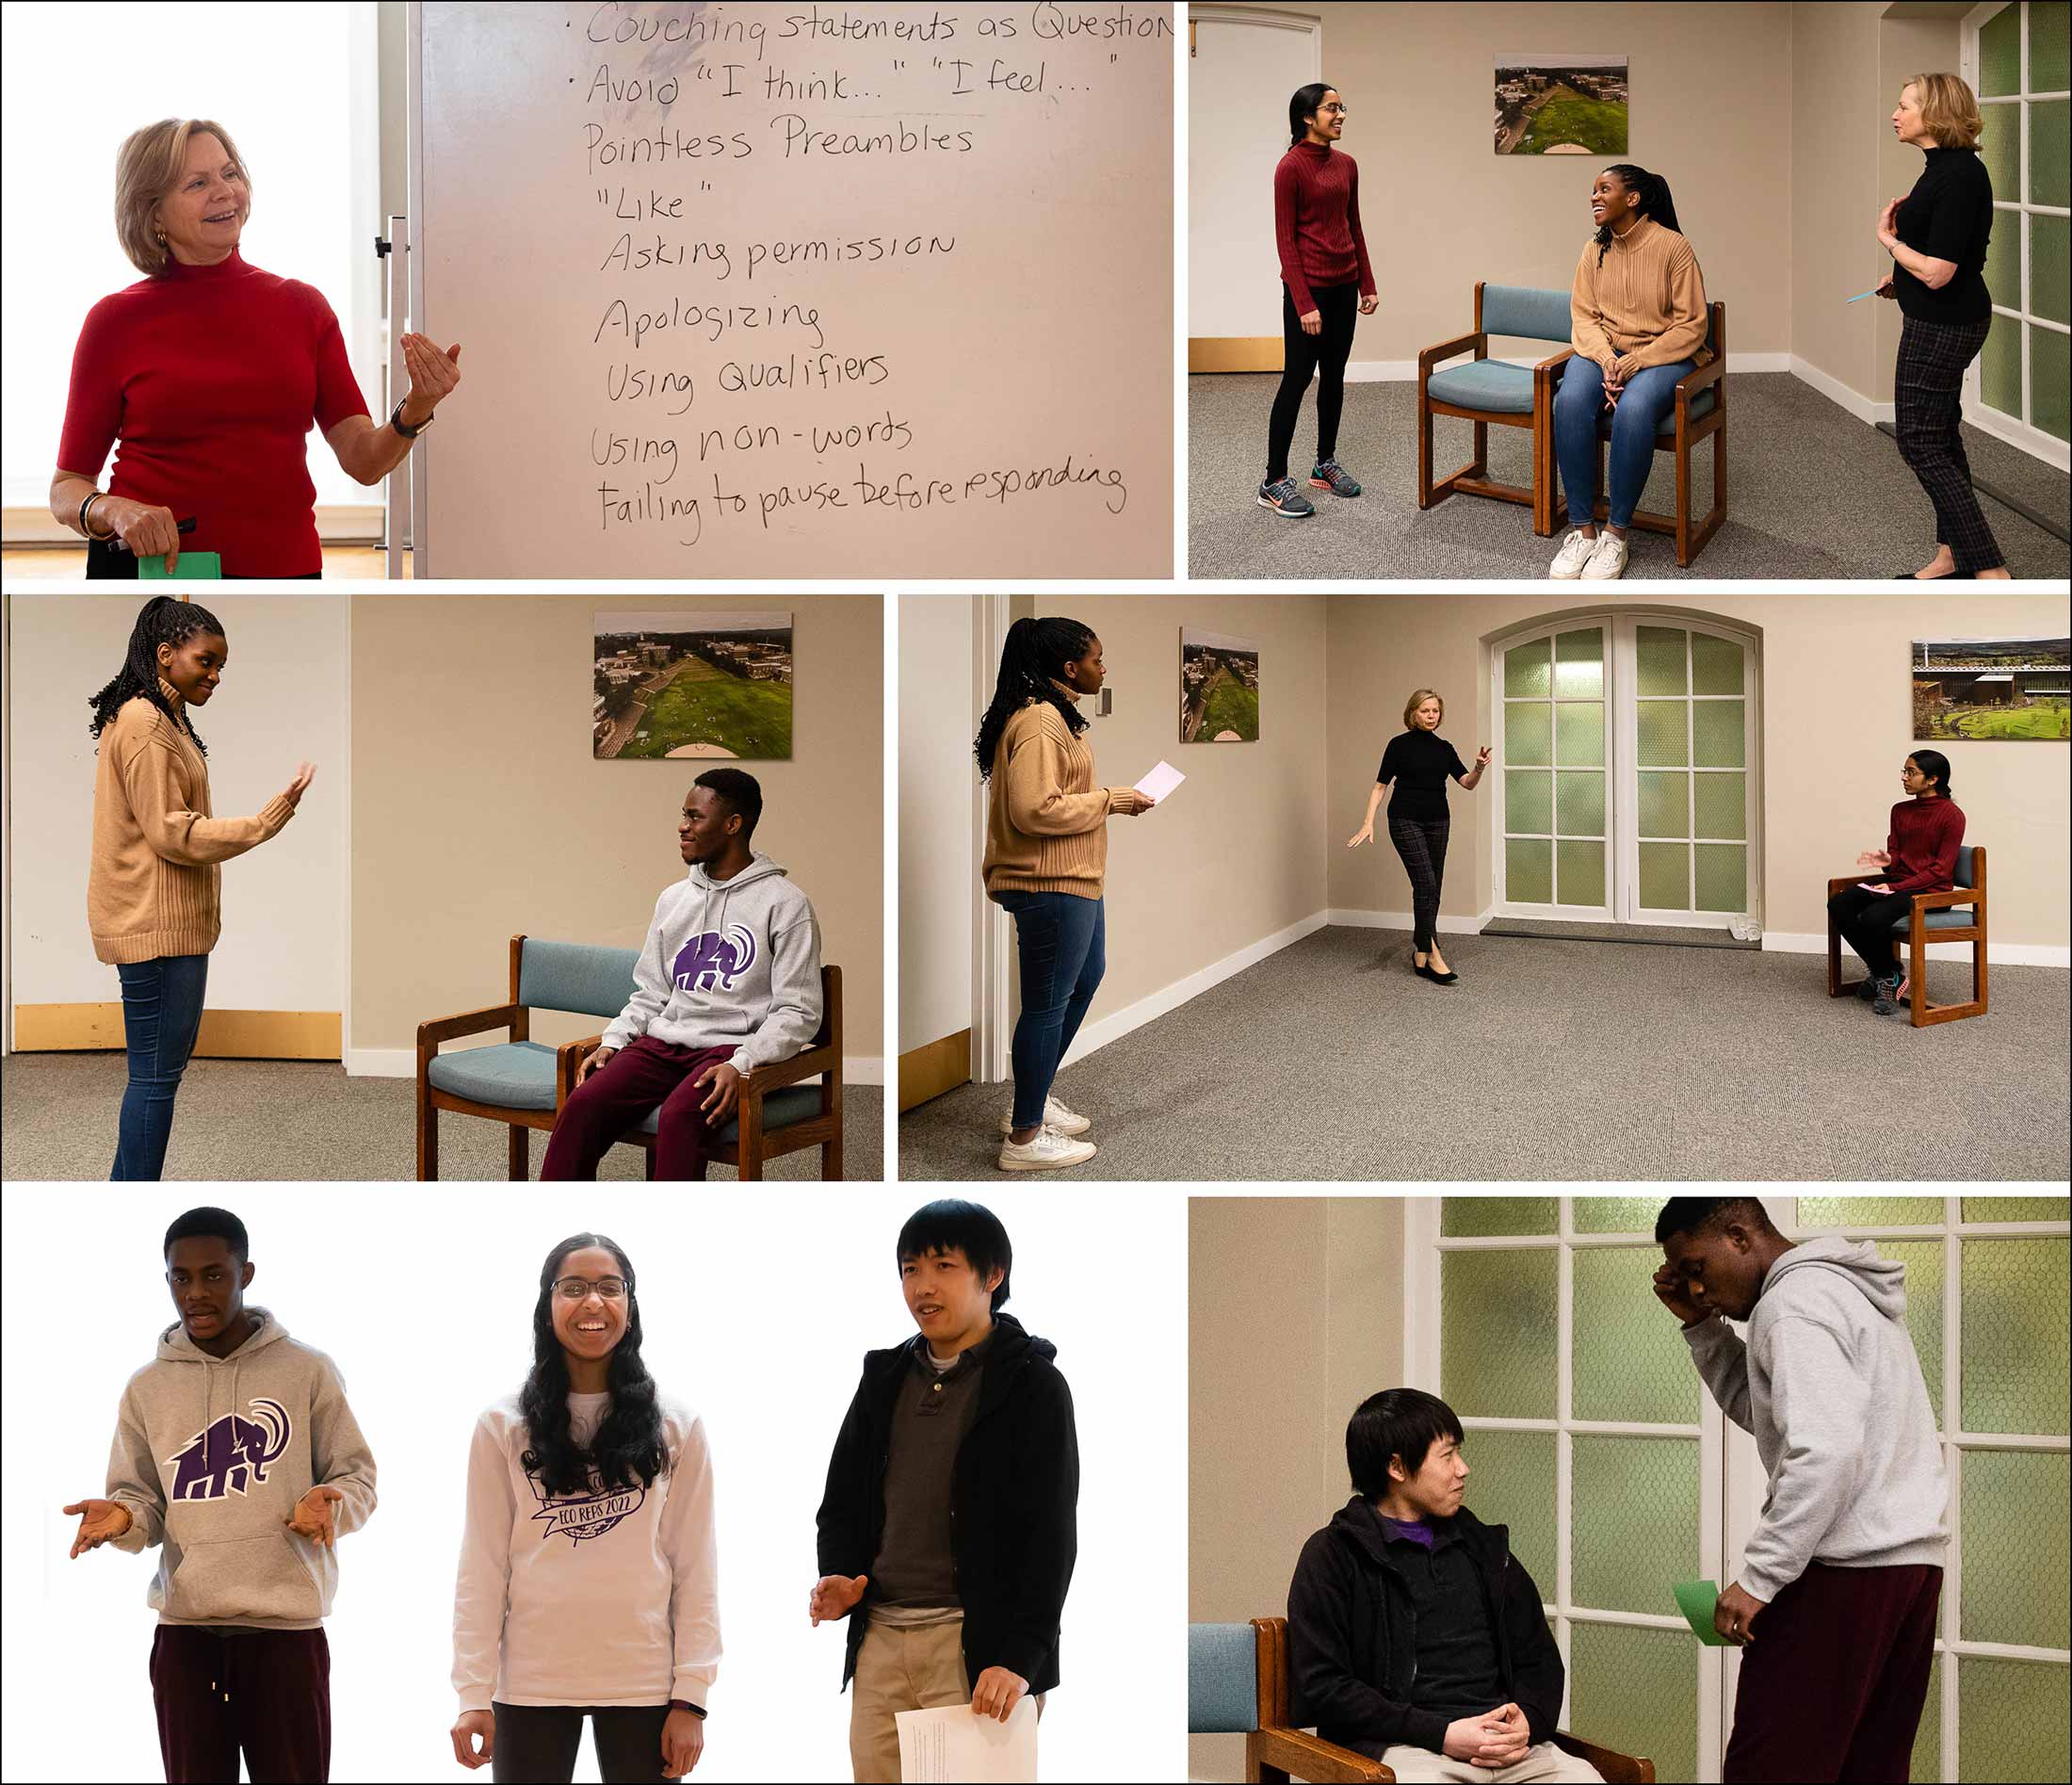 Collage of images of students practicing their public speaking skills